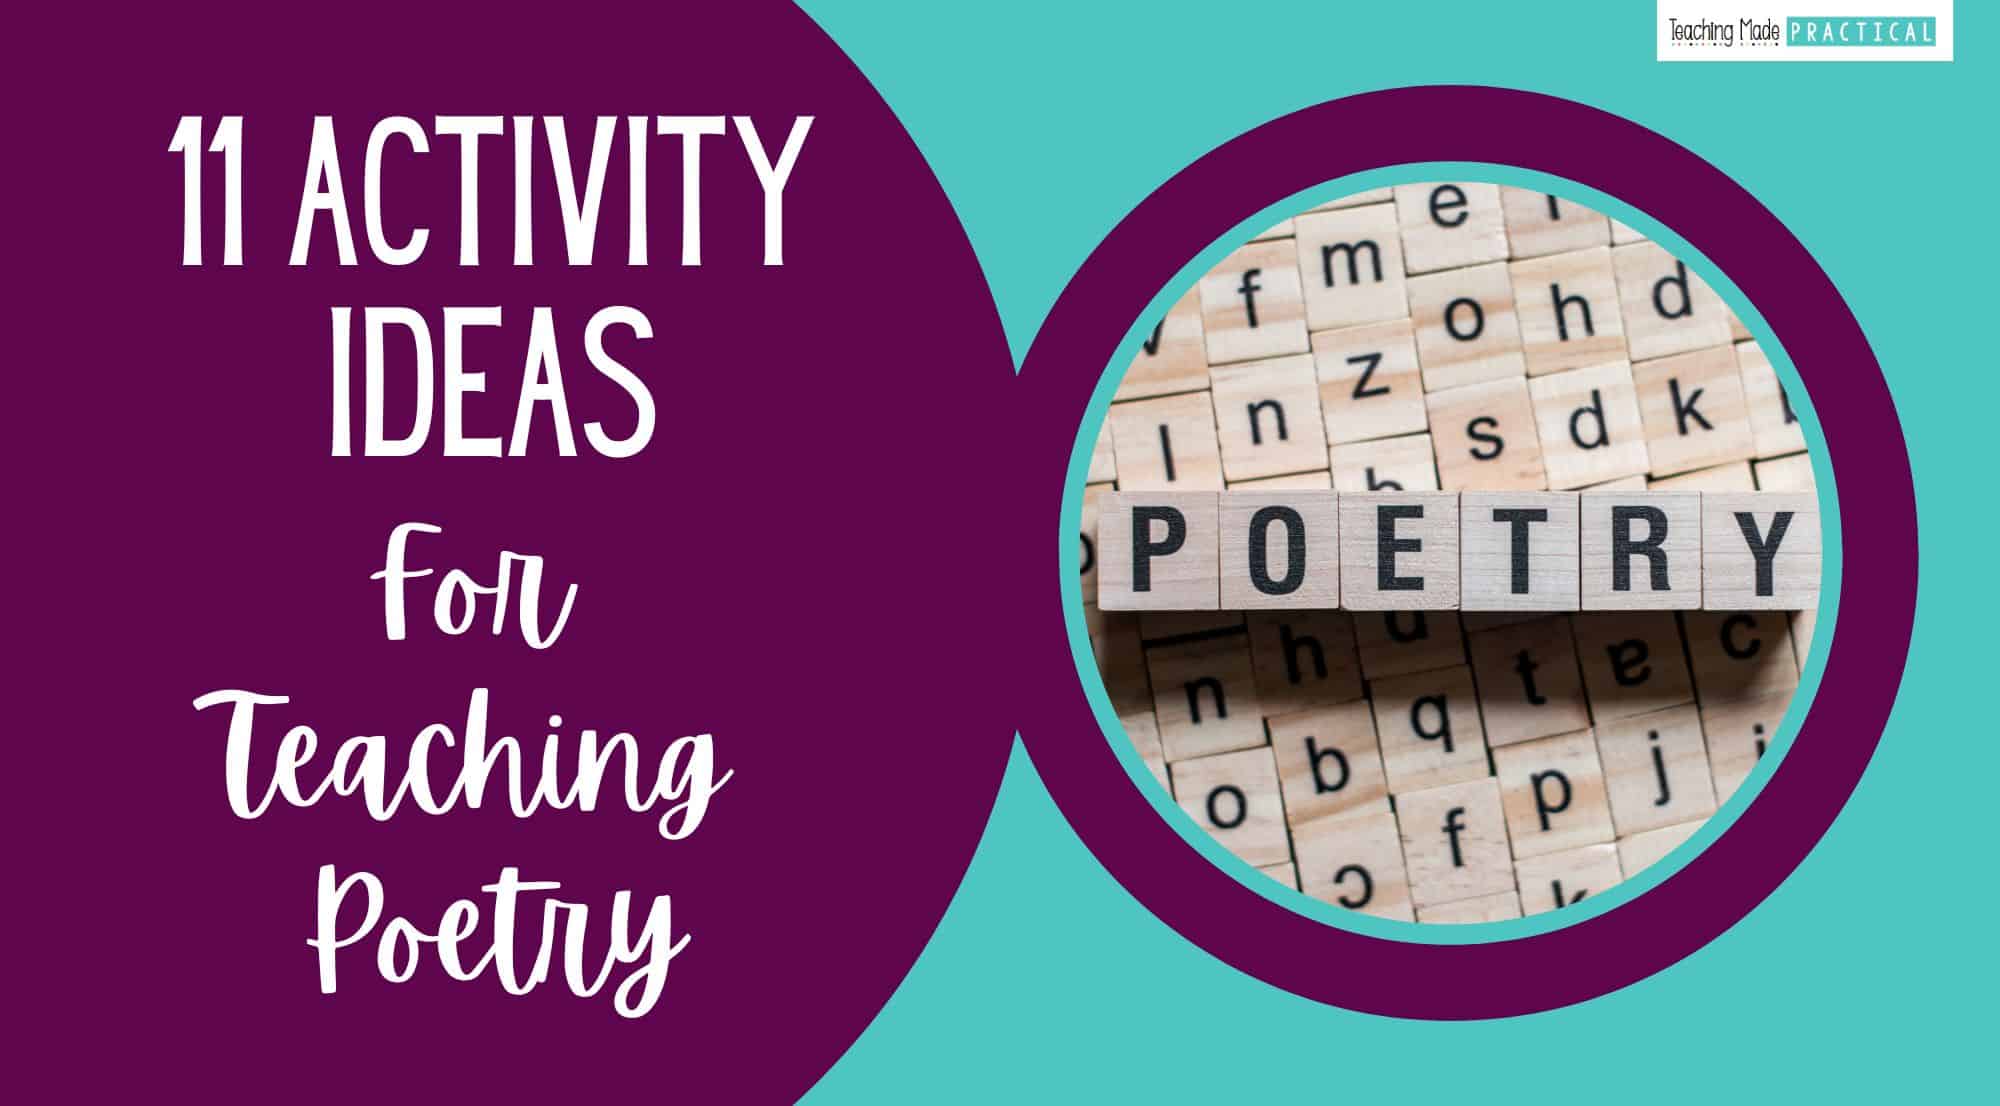 Activity Ideas for Teaching Poetry Poetry Month Featured and Facebook